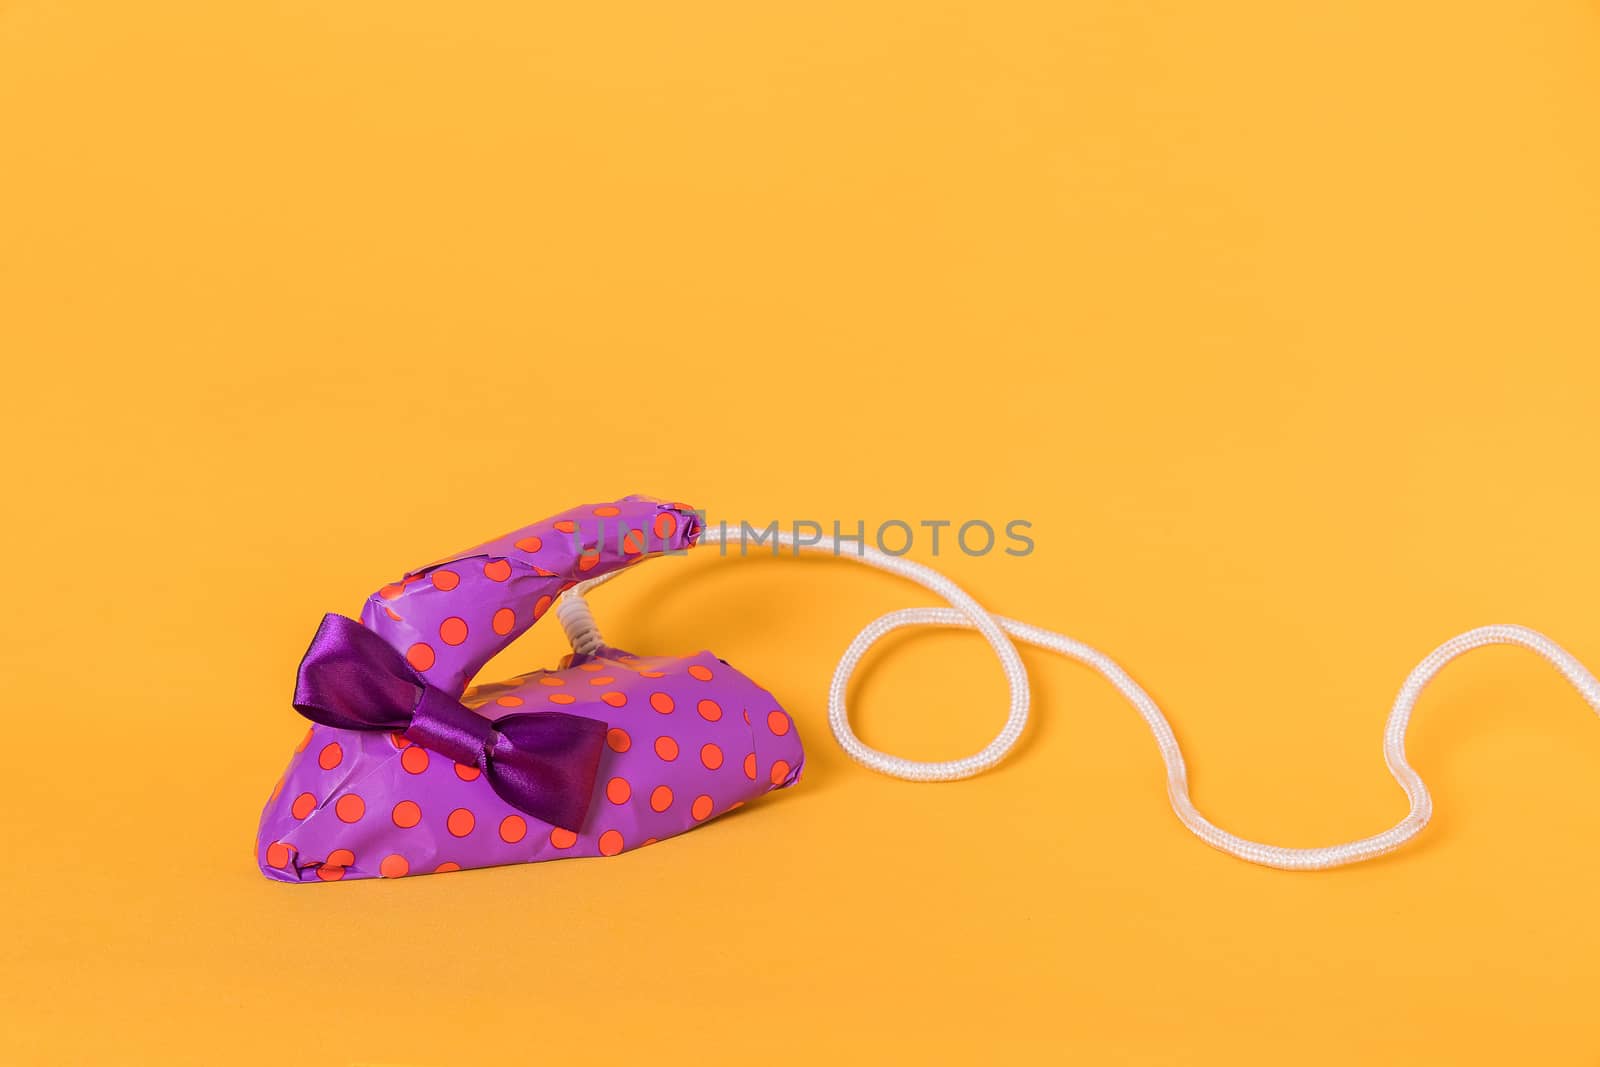 Iron wrapped in purple gift paper on an orange background